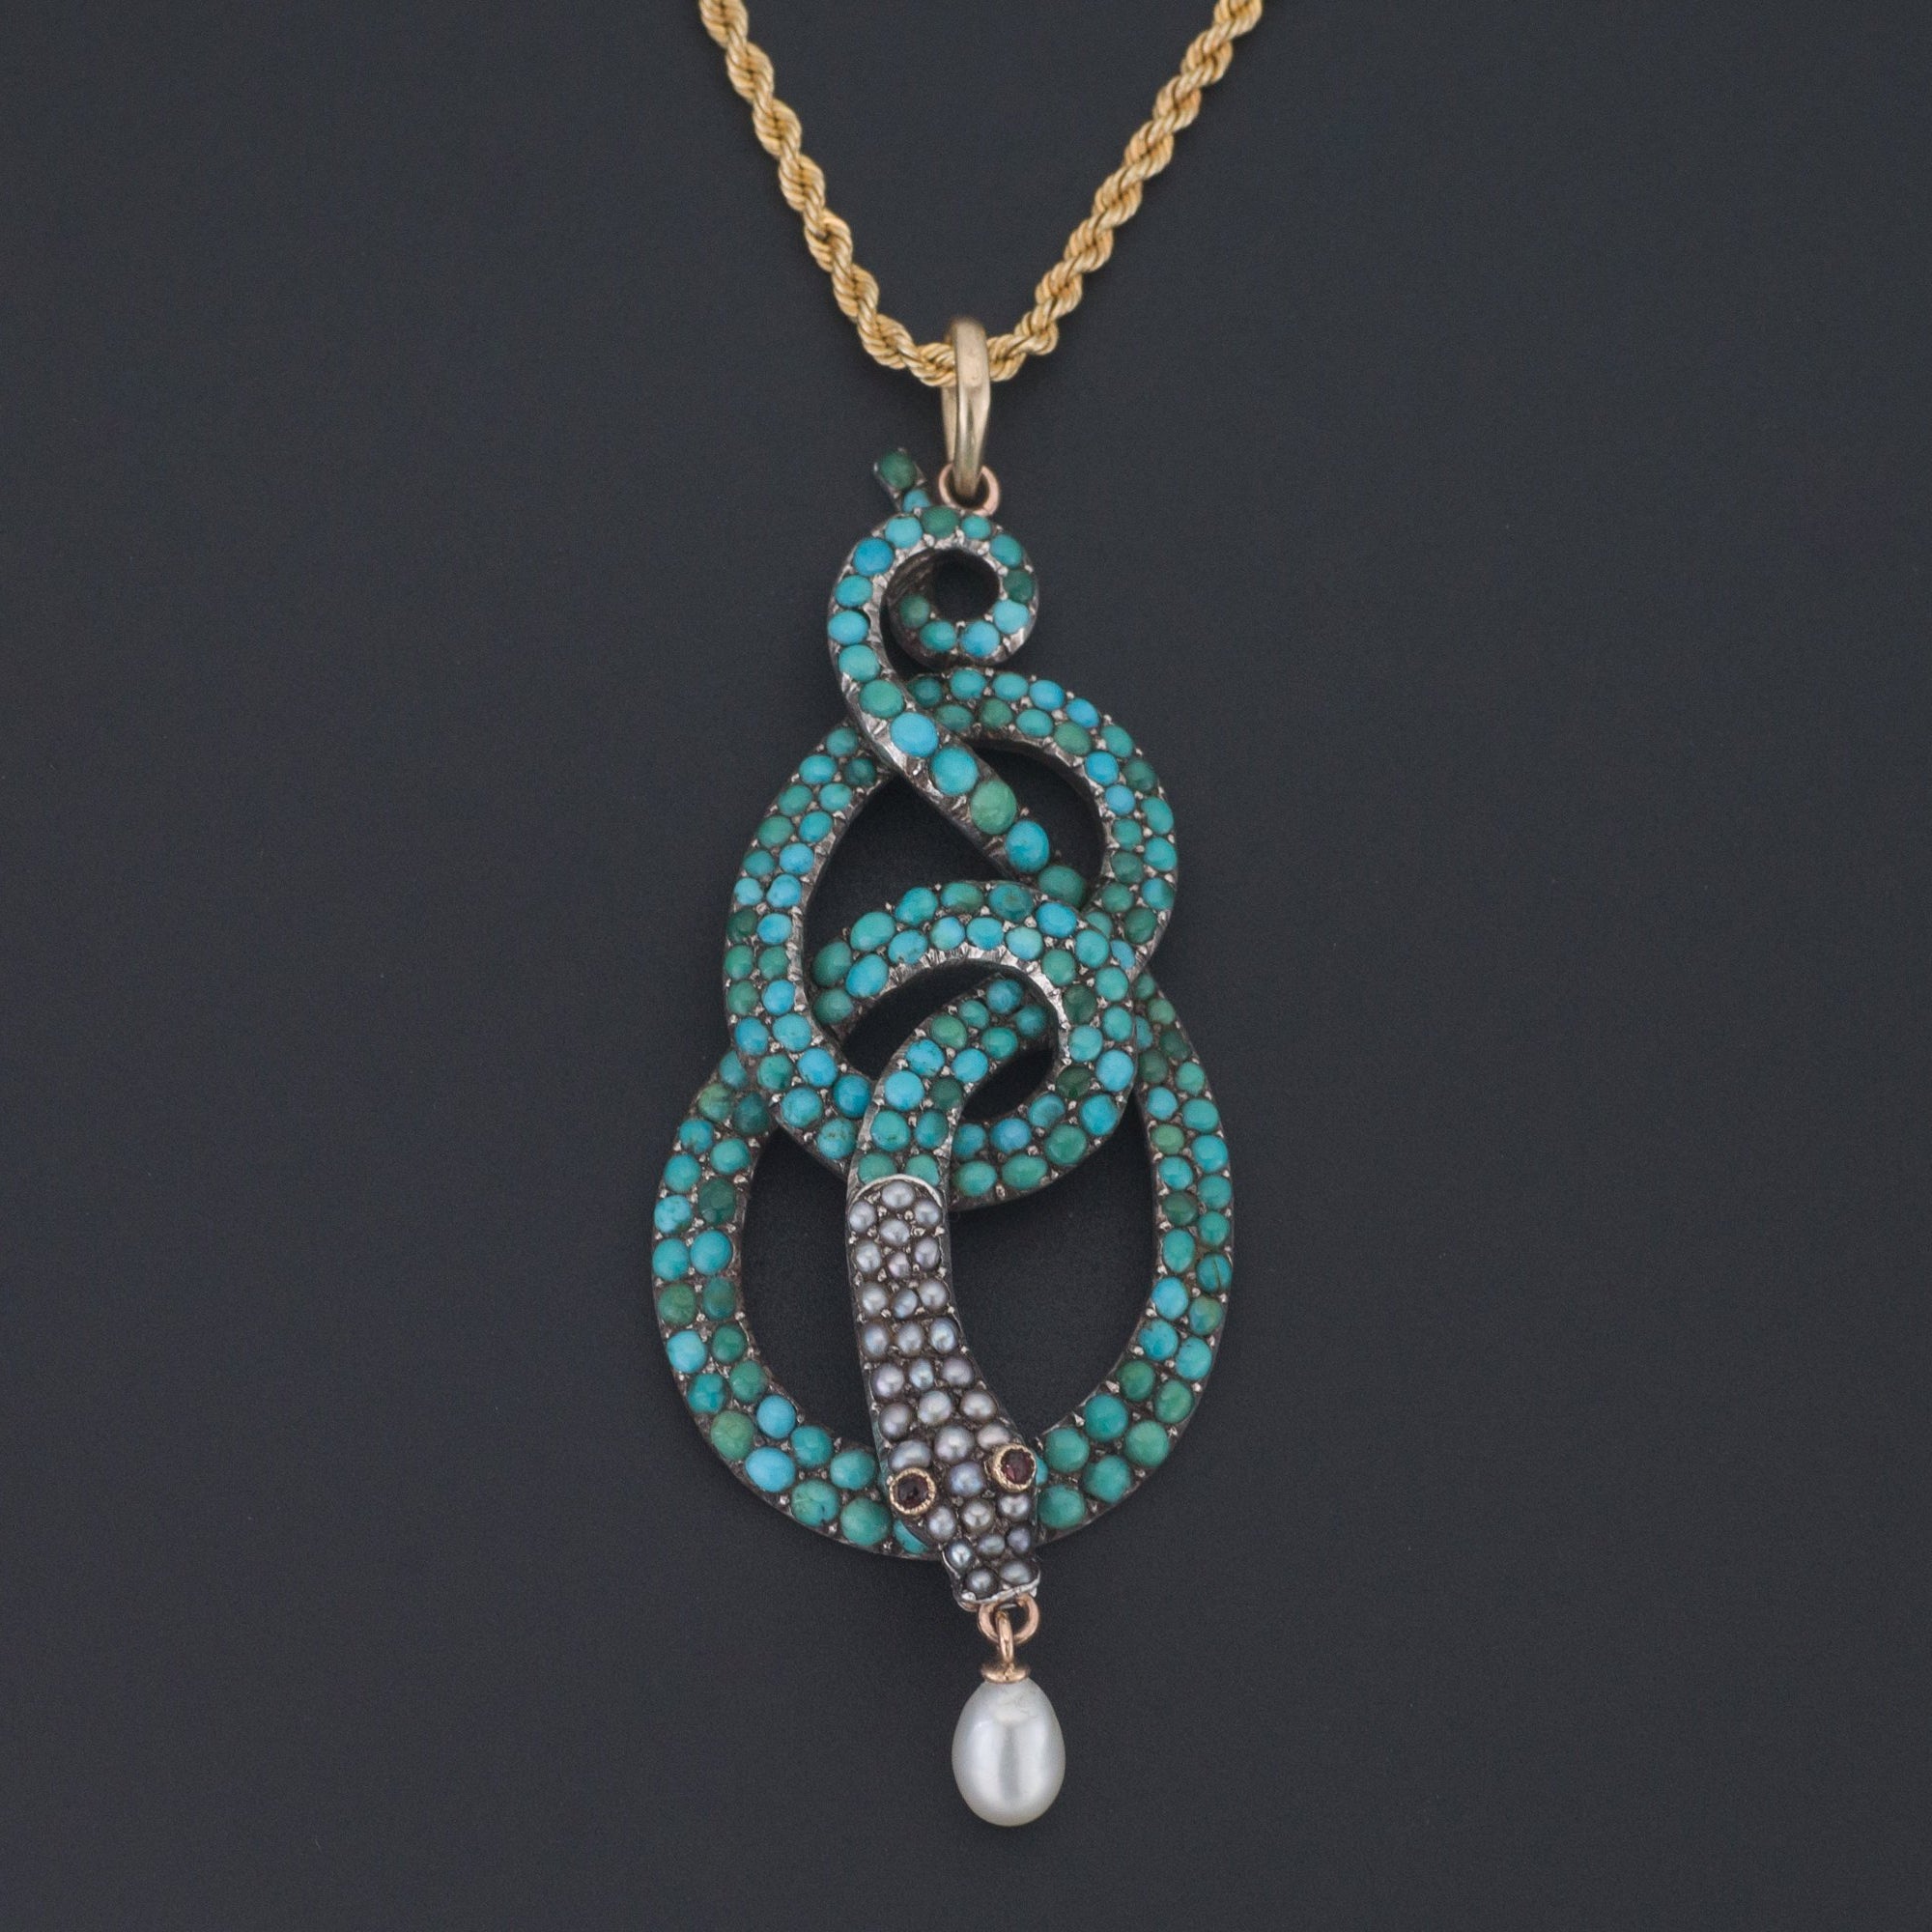 Antique Turquoise Snake Pendant | Antique Pin  Conversion | Antique Silver Snake with Optional 14k Gold Chain | Turquoise Pendant